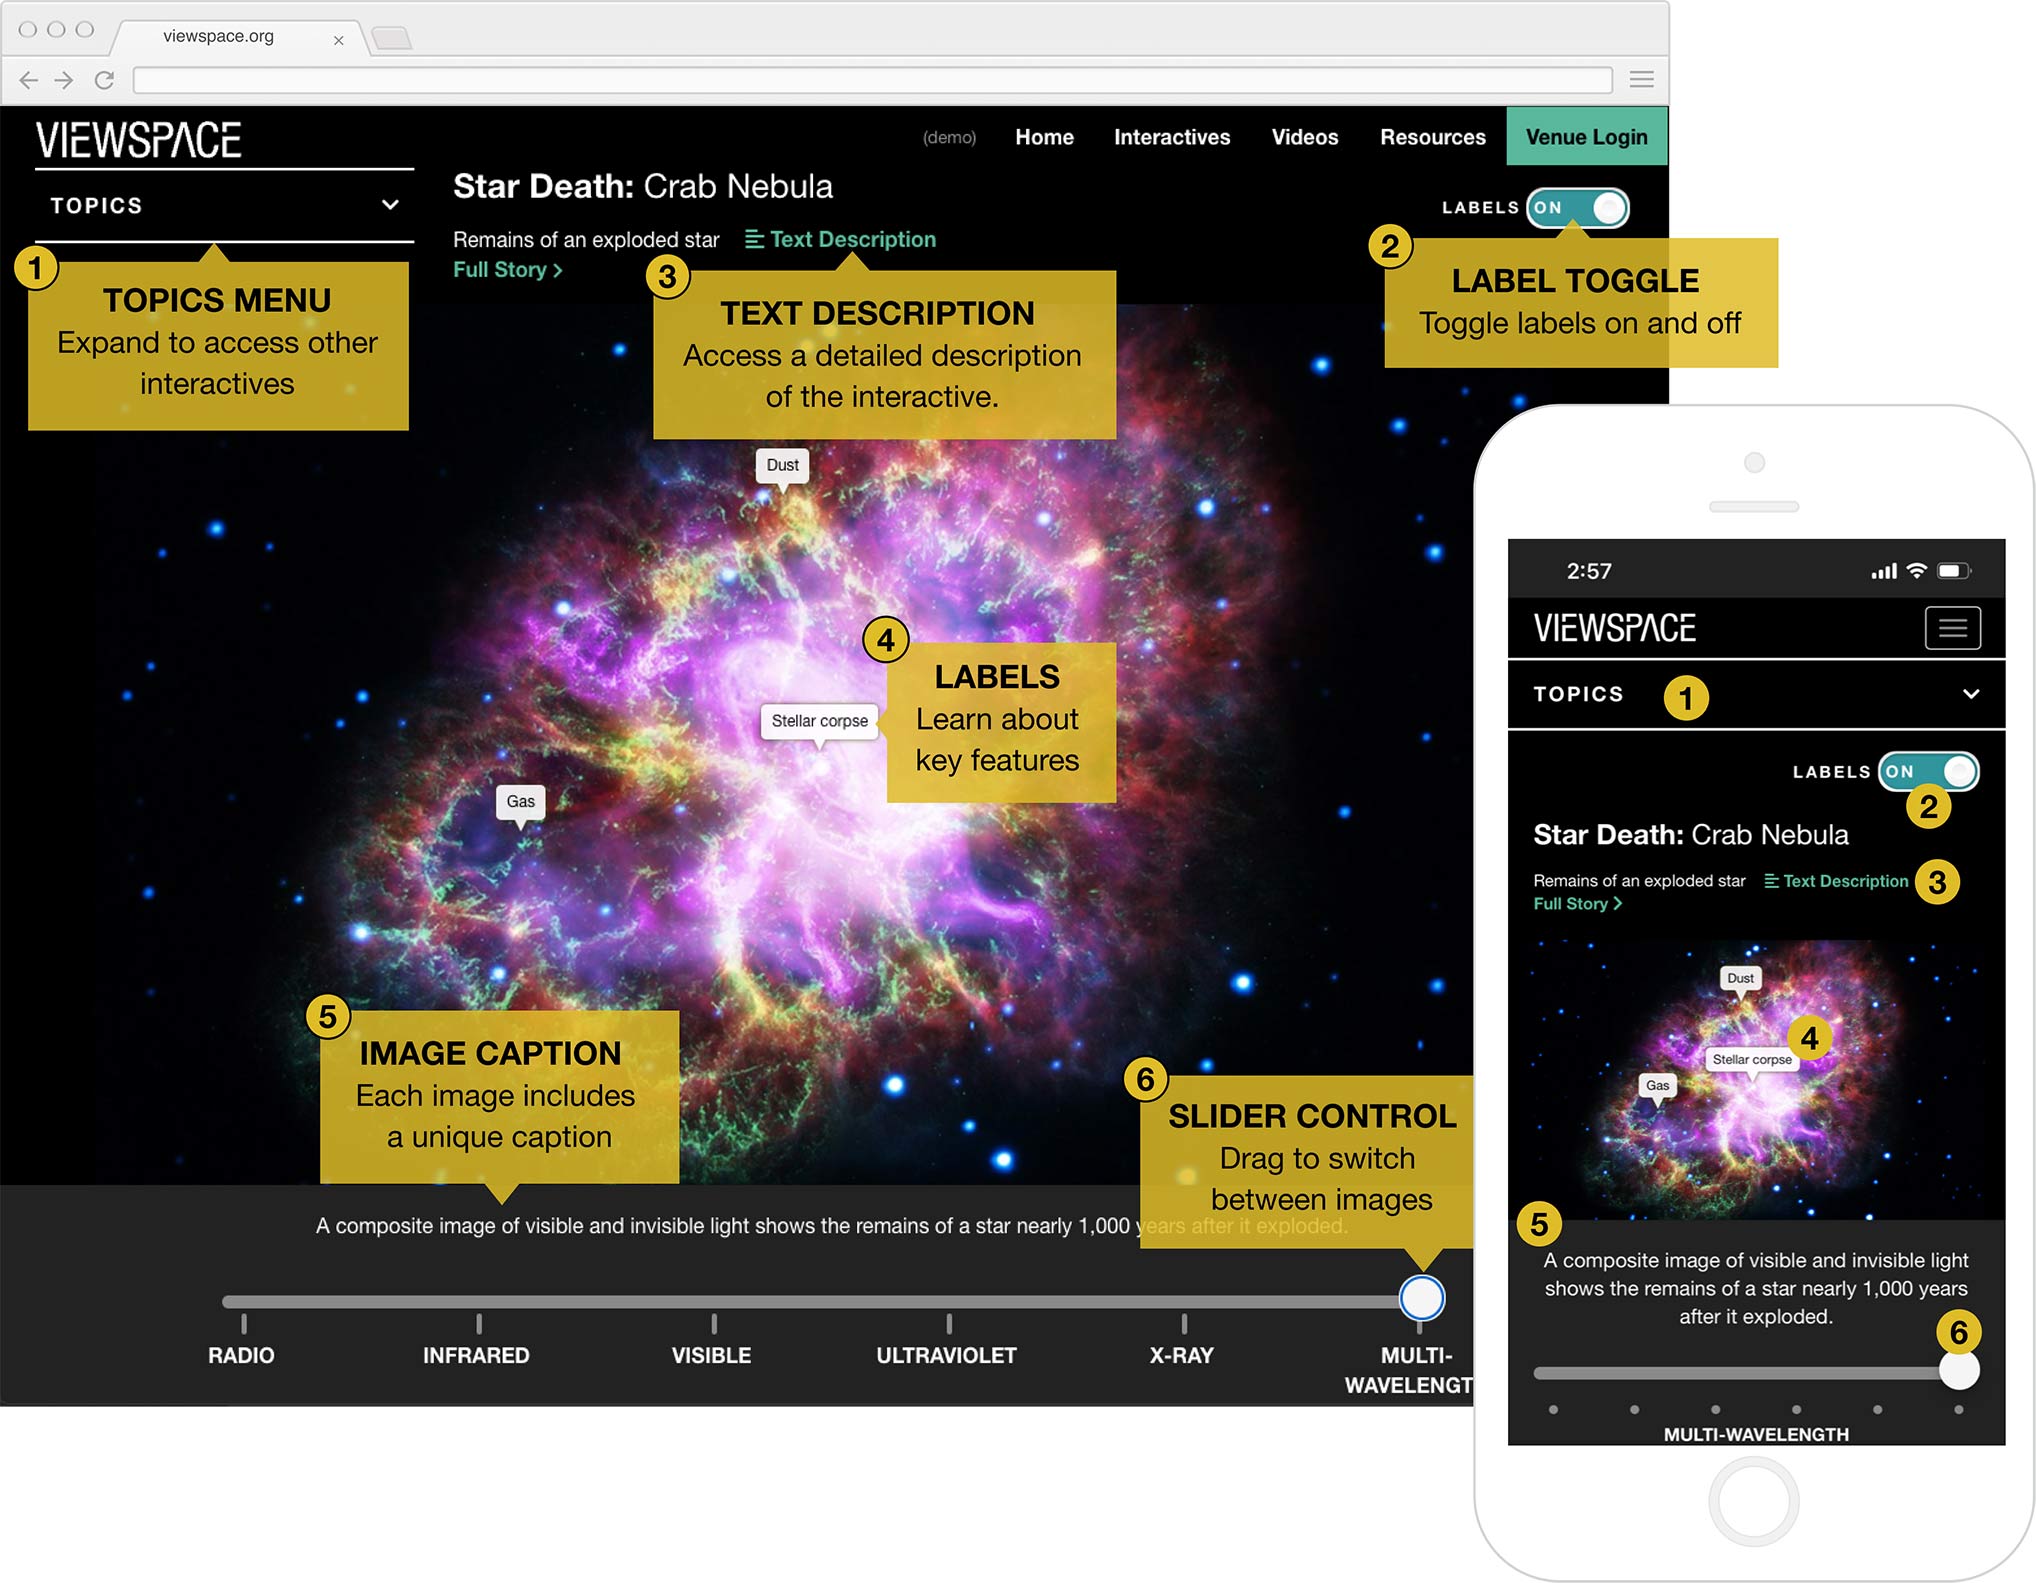 Infographic calling out six key features of a ViewSpace interactive, as seen on desktop monitor and mobile phone. Both show a color image of the Crab Nebula with labels, a caption below the image, and an interactive slider bar below the caption. On the desktop view, the key features are called out with numbers and explanatory text. On mobile view, the same features are called out with corresponding numbers, but no text. The called-out features are (1) Top left: “Topics Menu: Expand to access other interactives.” (2) Top right: “Label Toggle: Toggle labels on and off.” (3) Top middle: “Text Description: Access a detailed description of the interactive. (4) On image: “Labels: Learn about key features.” (5) Below image: “Image Caption: Each image includes a unique caption.” (6) Below caption: “Slider Control: Drag to switch between images.”